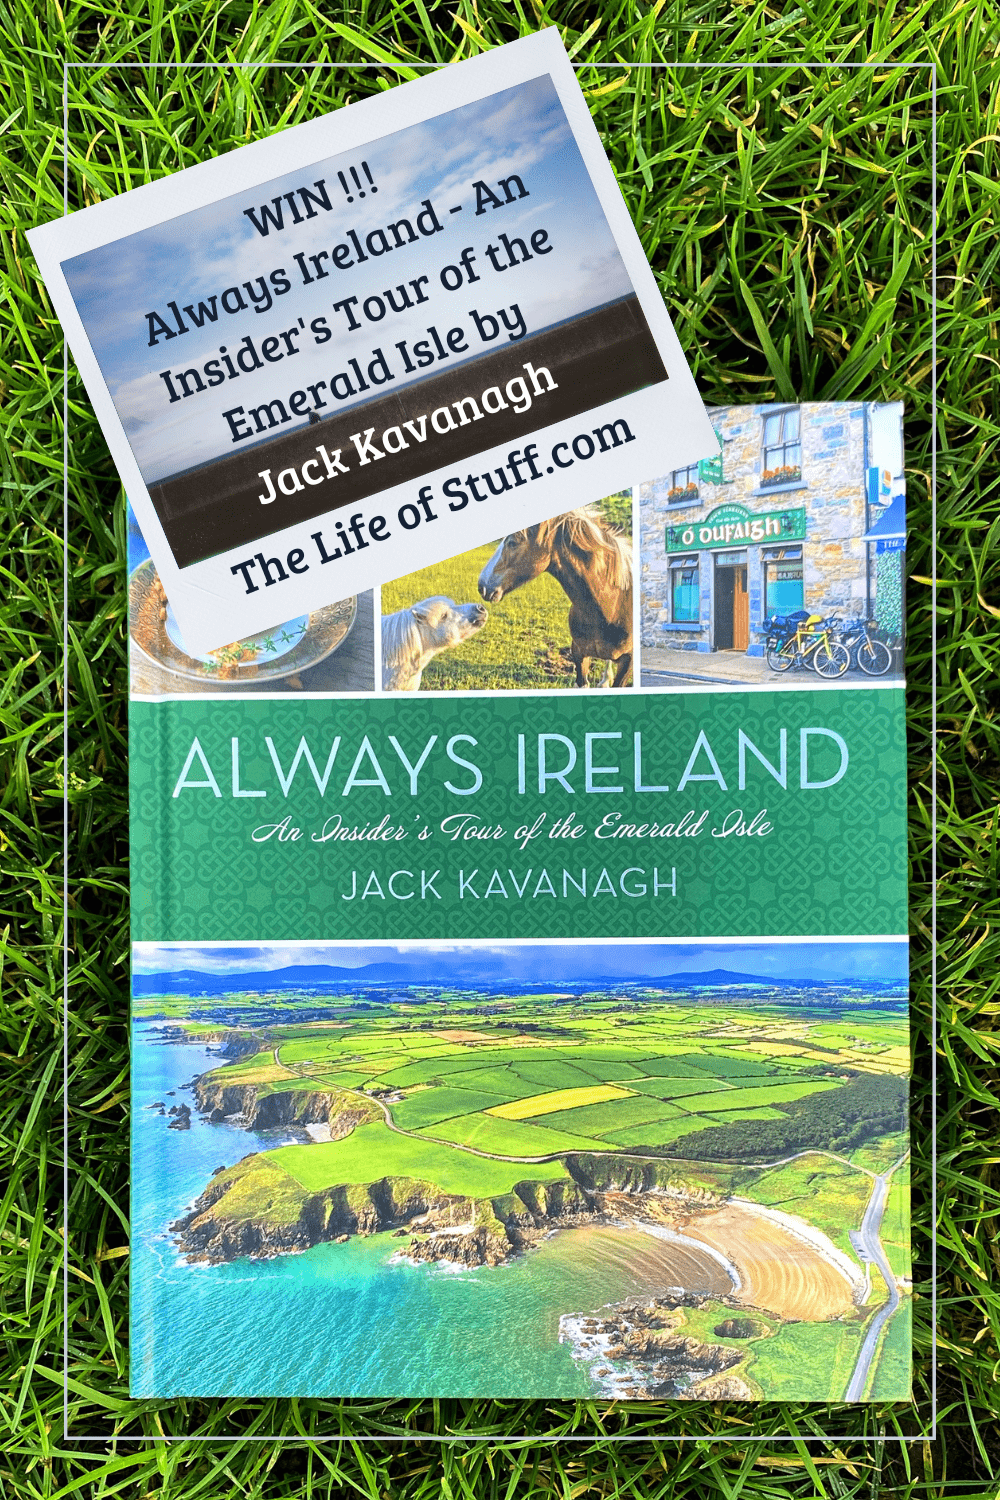 WIN !!! Always Ireland - An Insider's Tour of the Emerald Isle by Jack Kavanagh The Life of Stuff.com